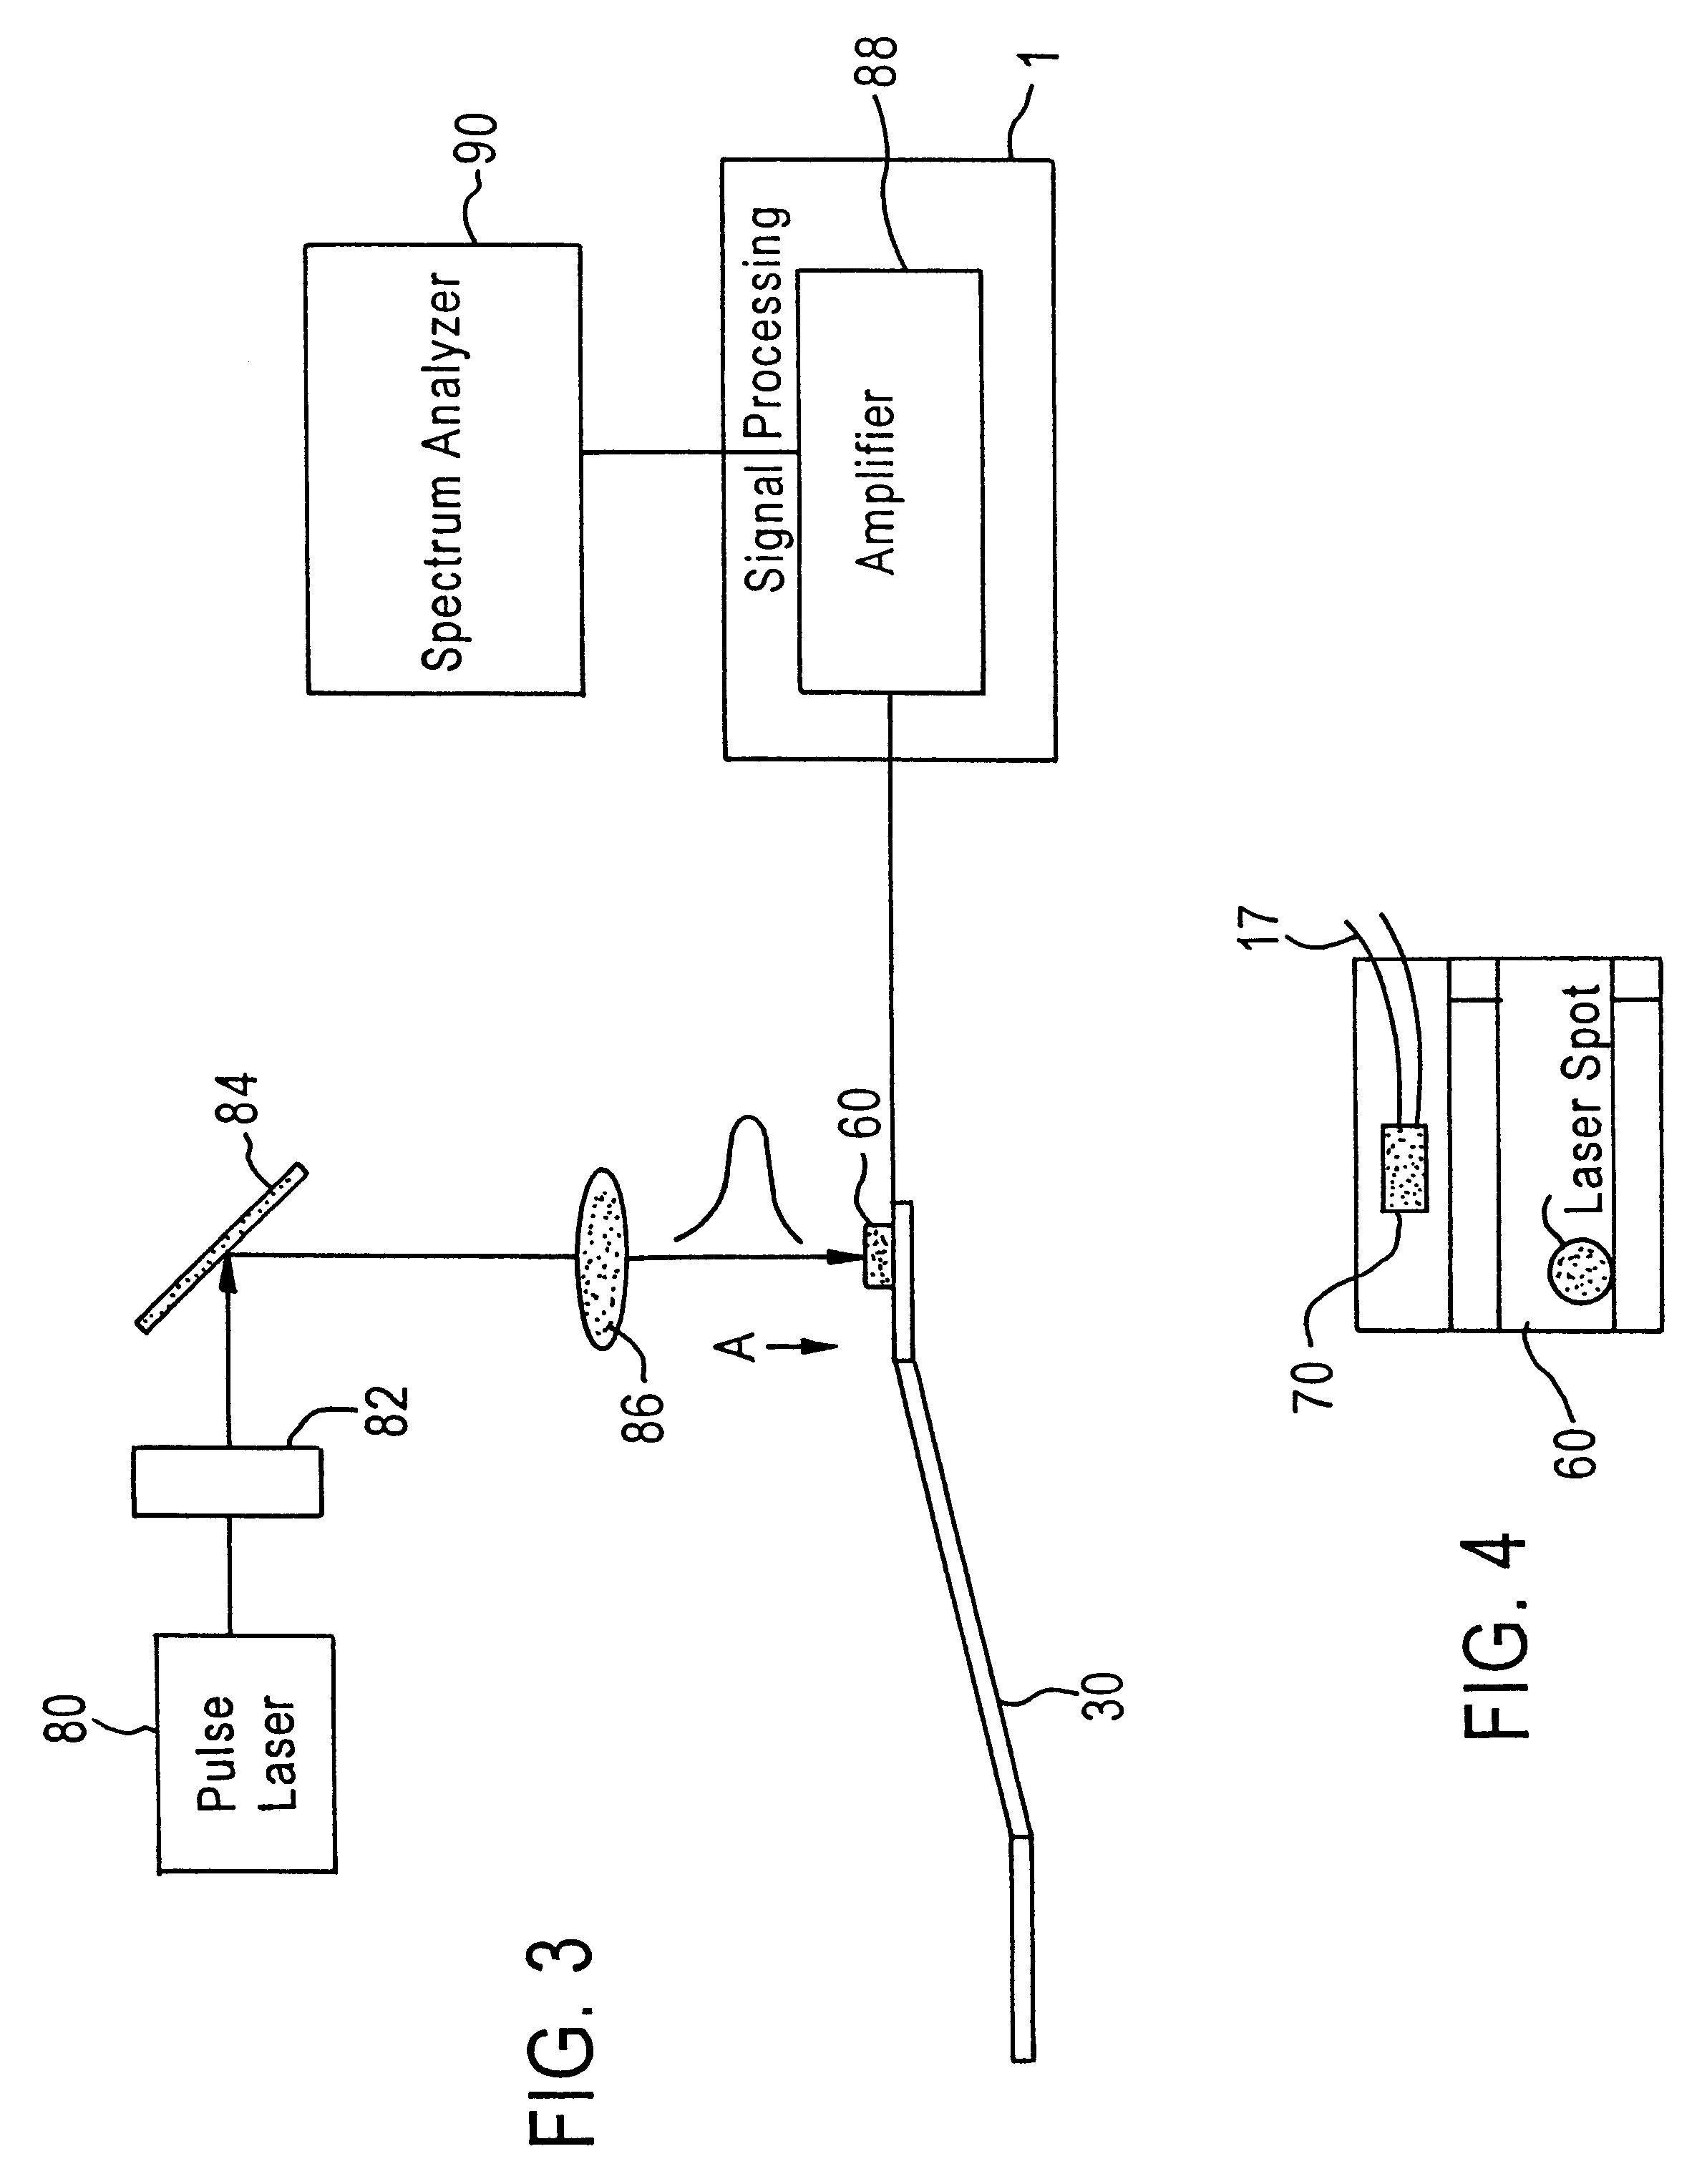 Method of calibrating a system for detecting contact of a glide head with a recording media surface